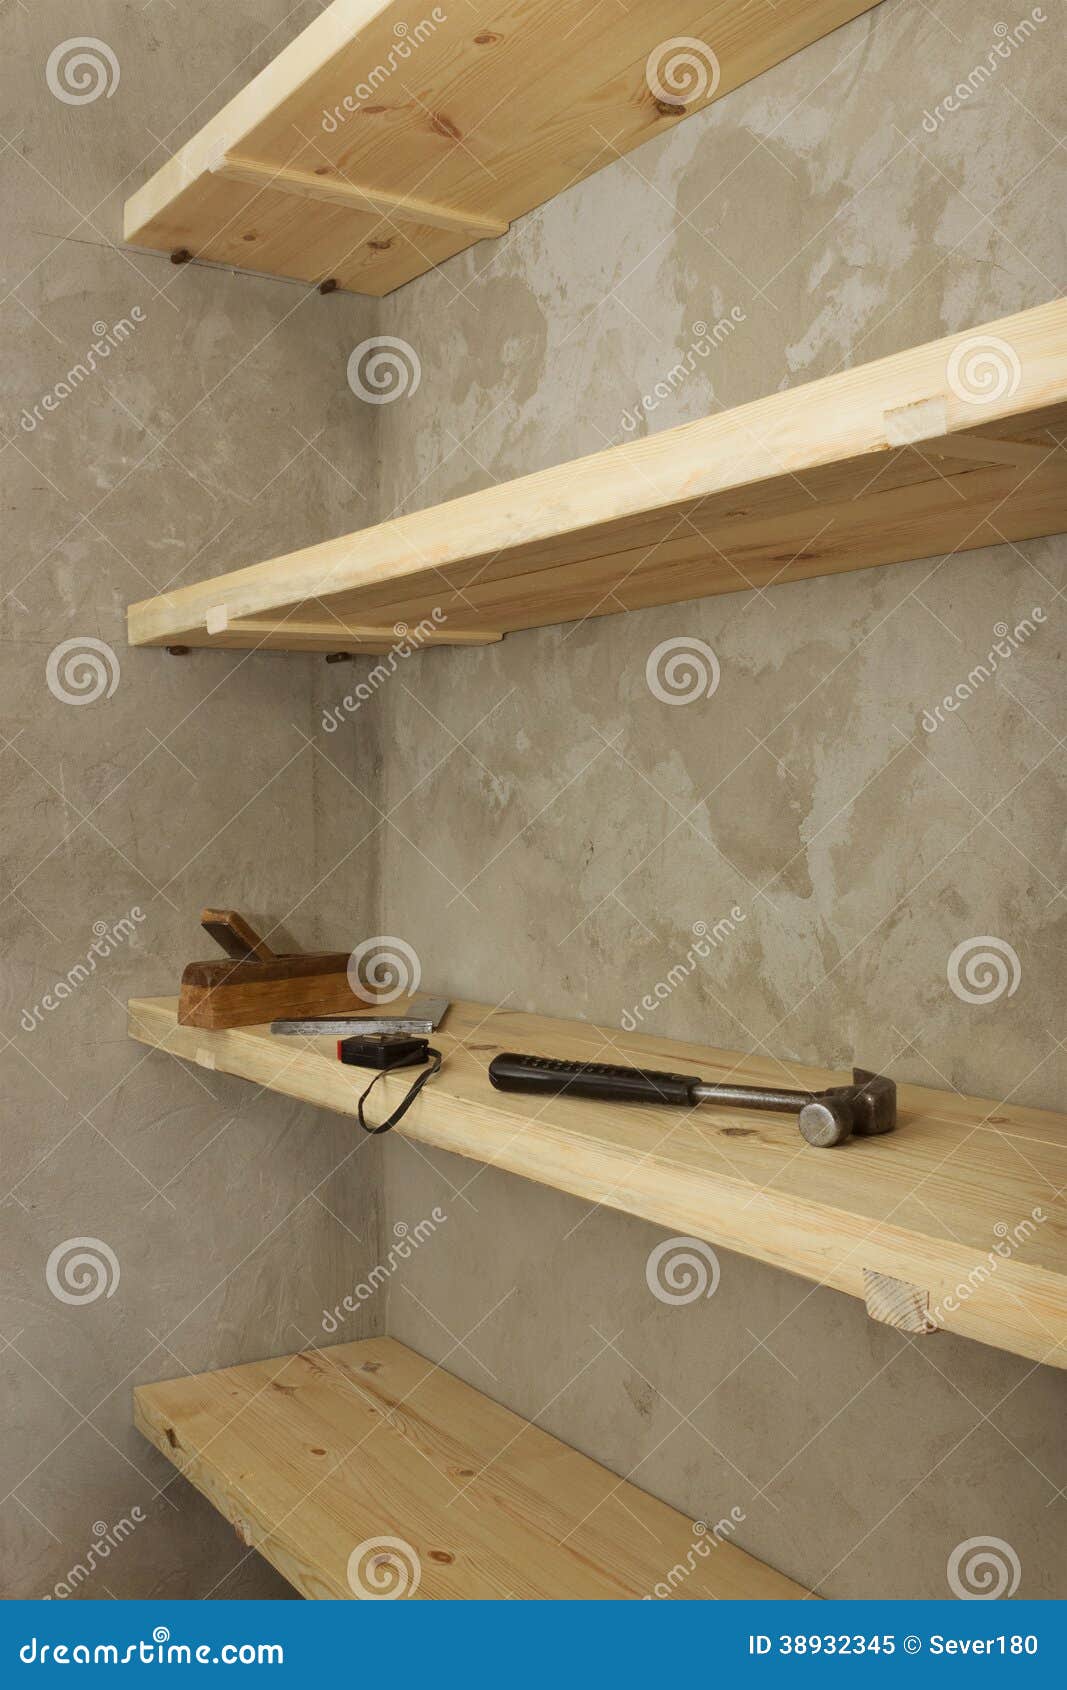 Solid Shelves Made Of Wood In Rural Pantry Stock Photo ...